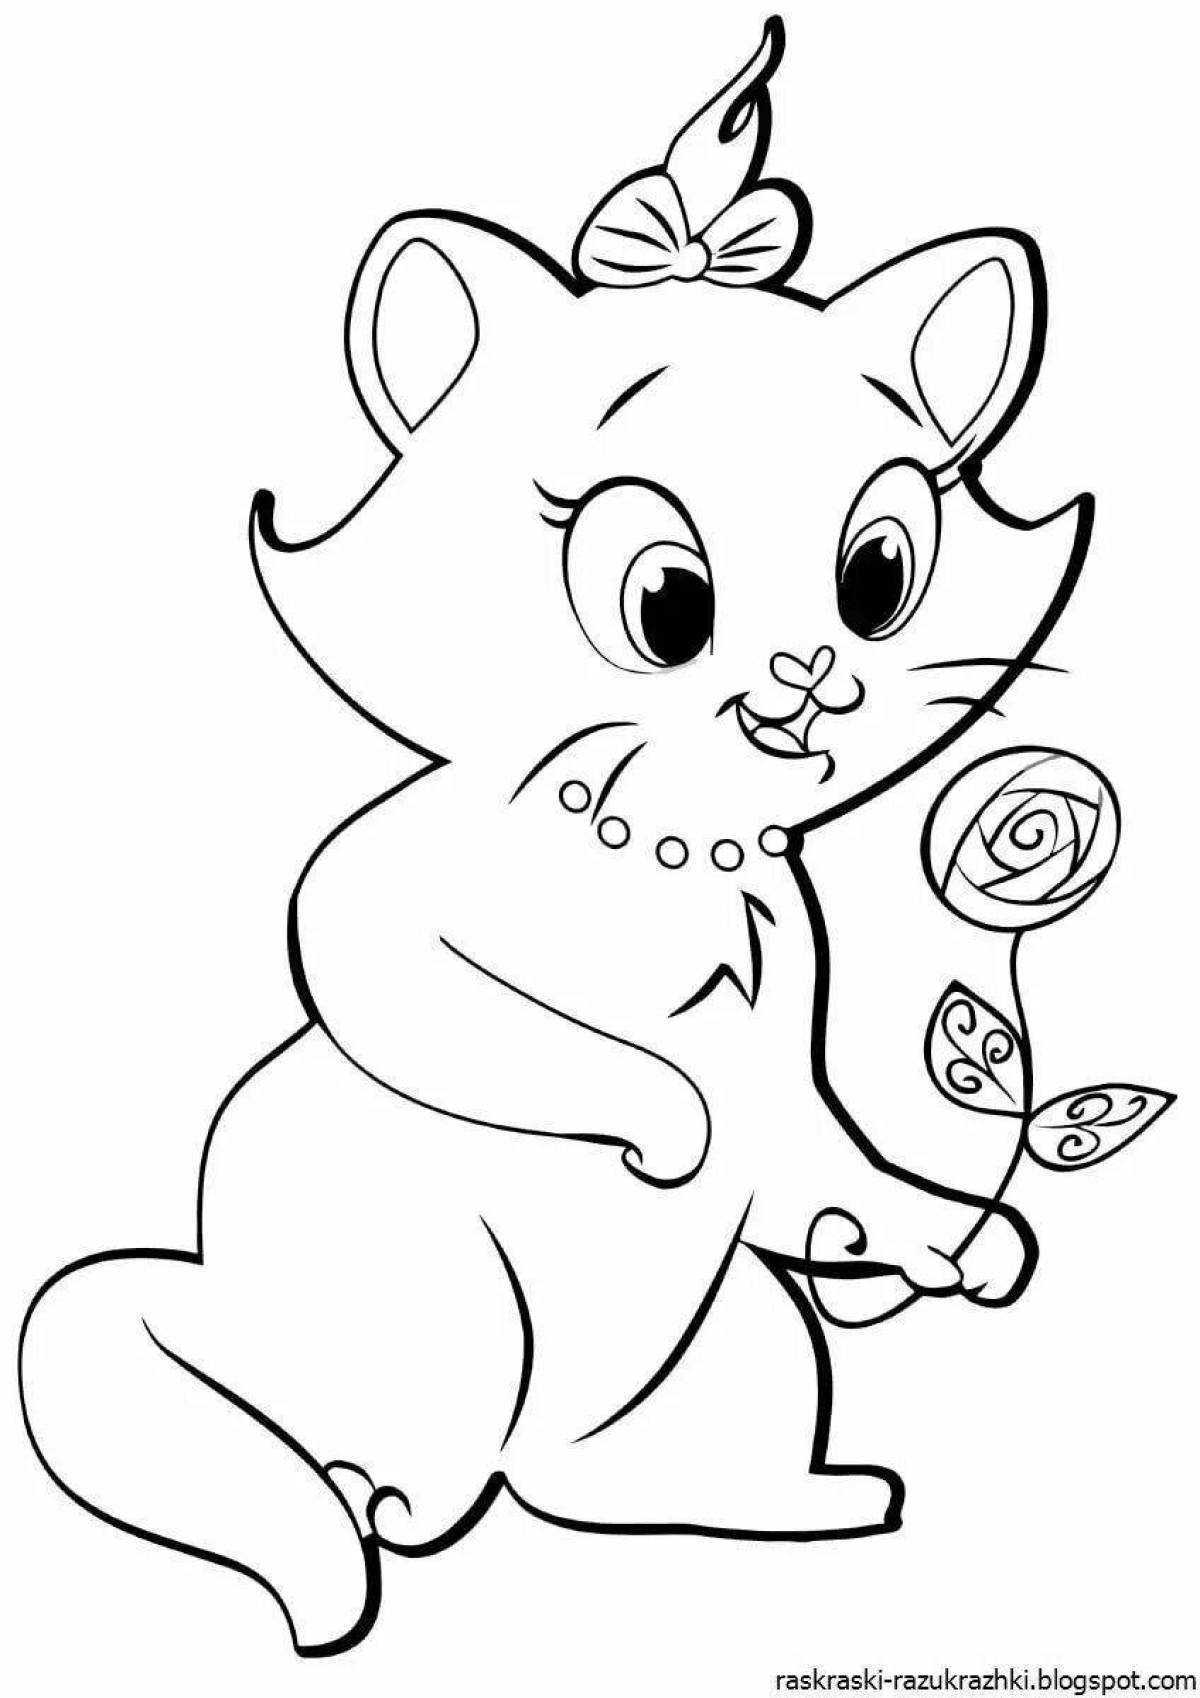 Sparkling pussy coloring book for kids